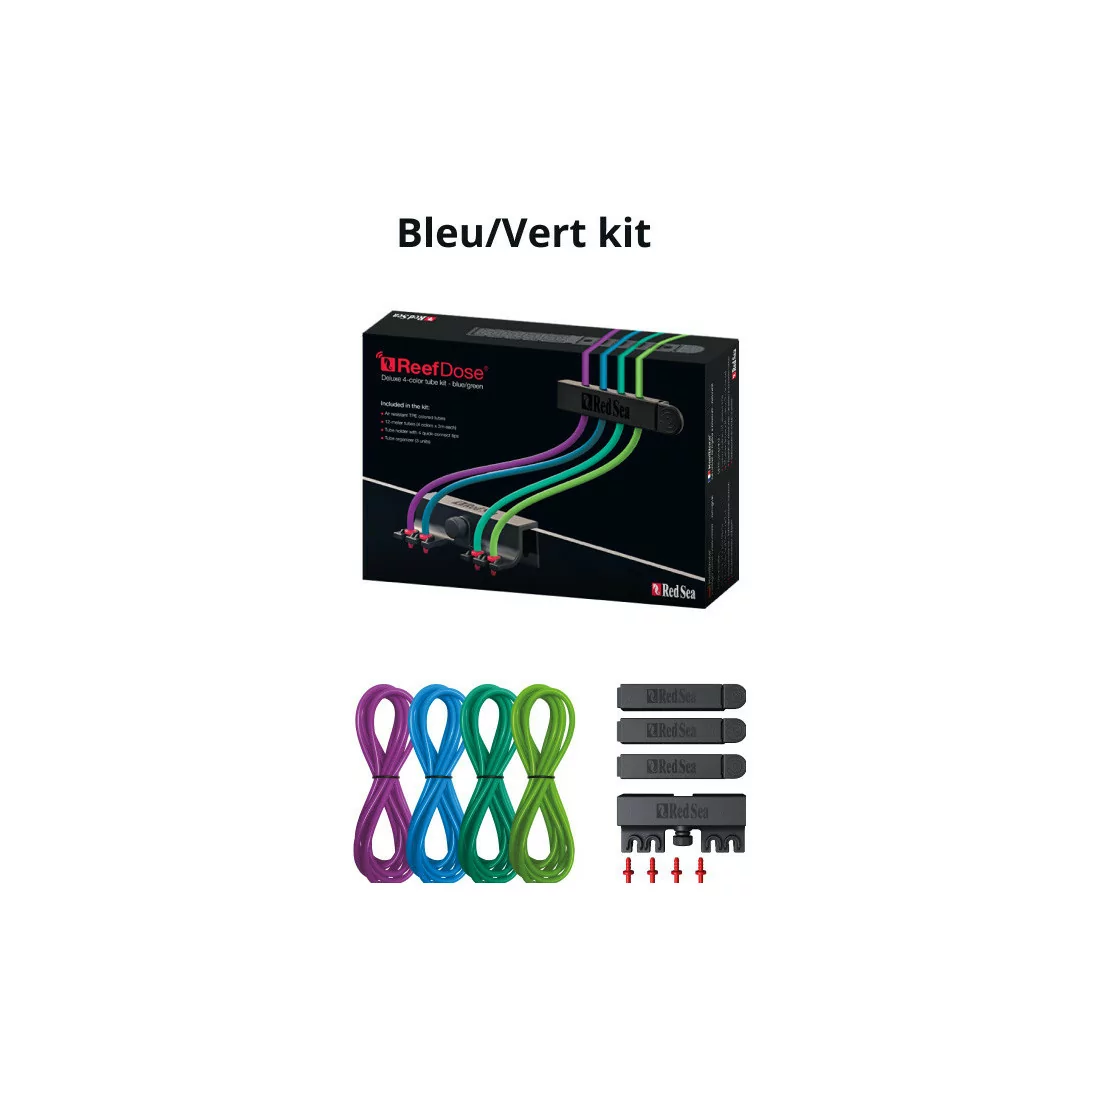 Deluxe 4-color (Blue/Green) hose kit for Reefdose